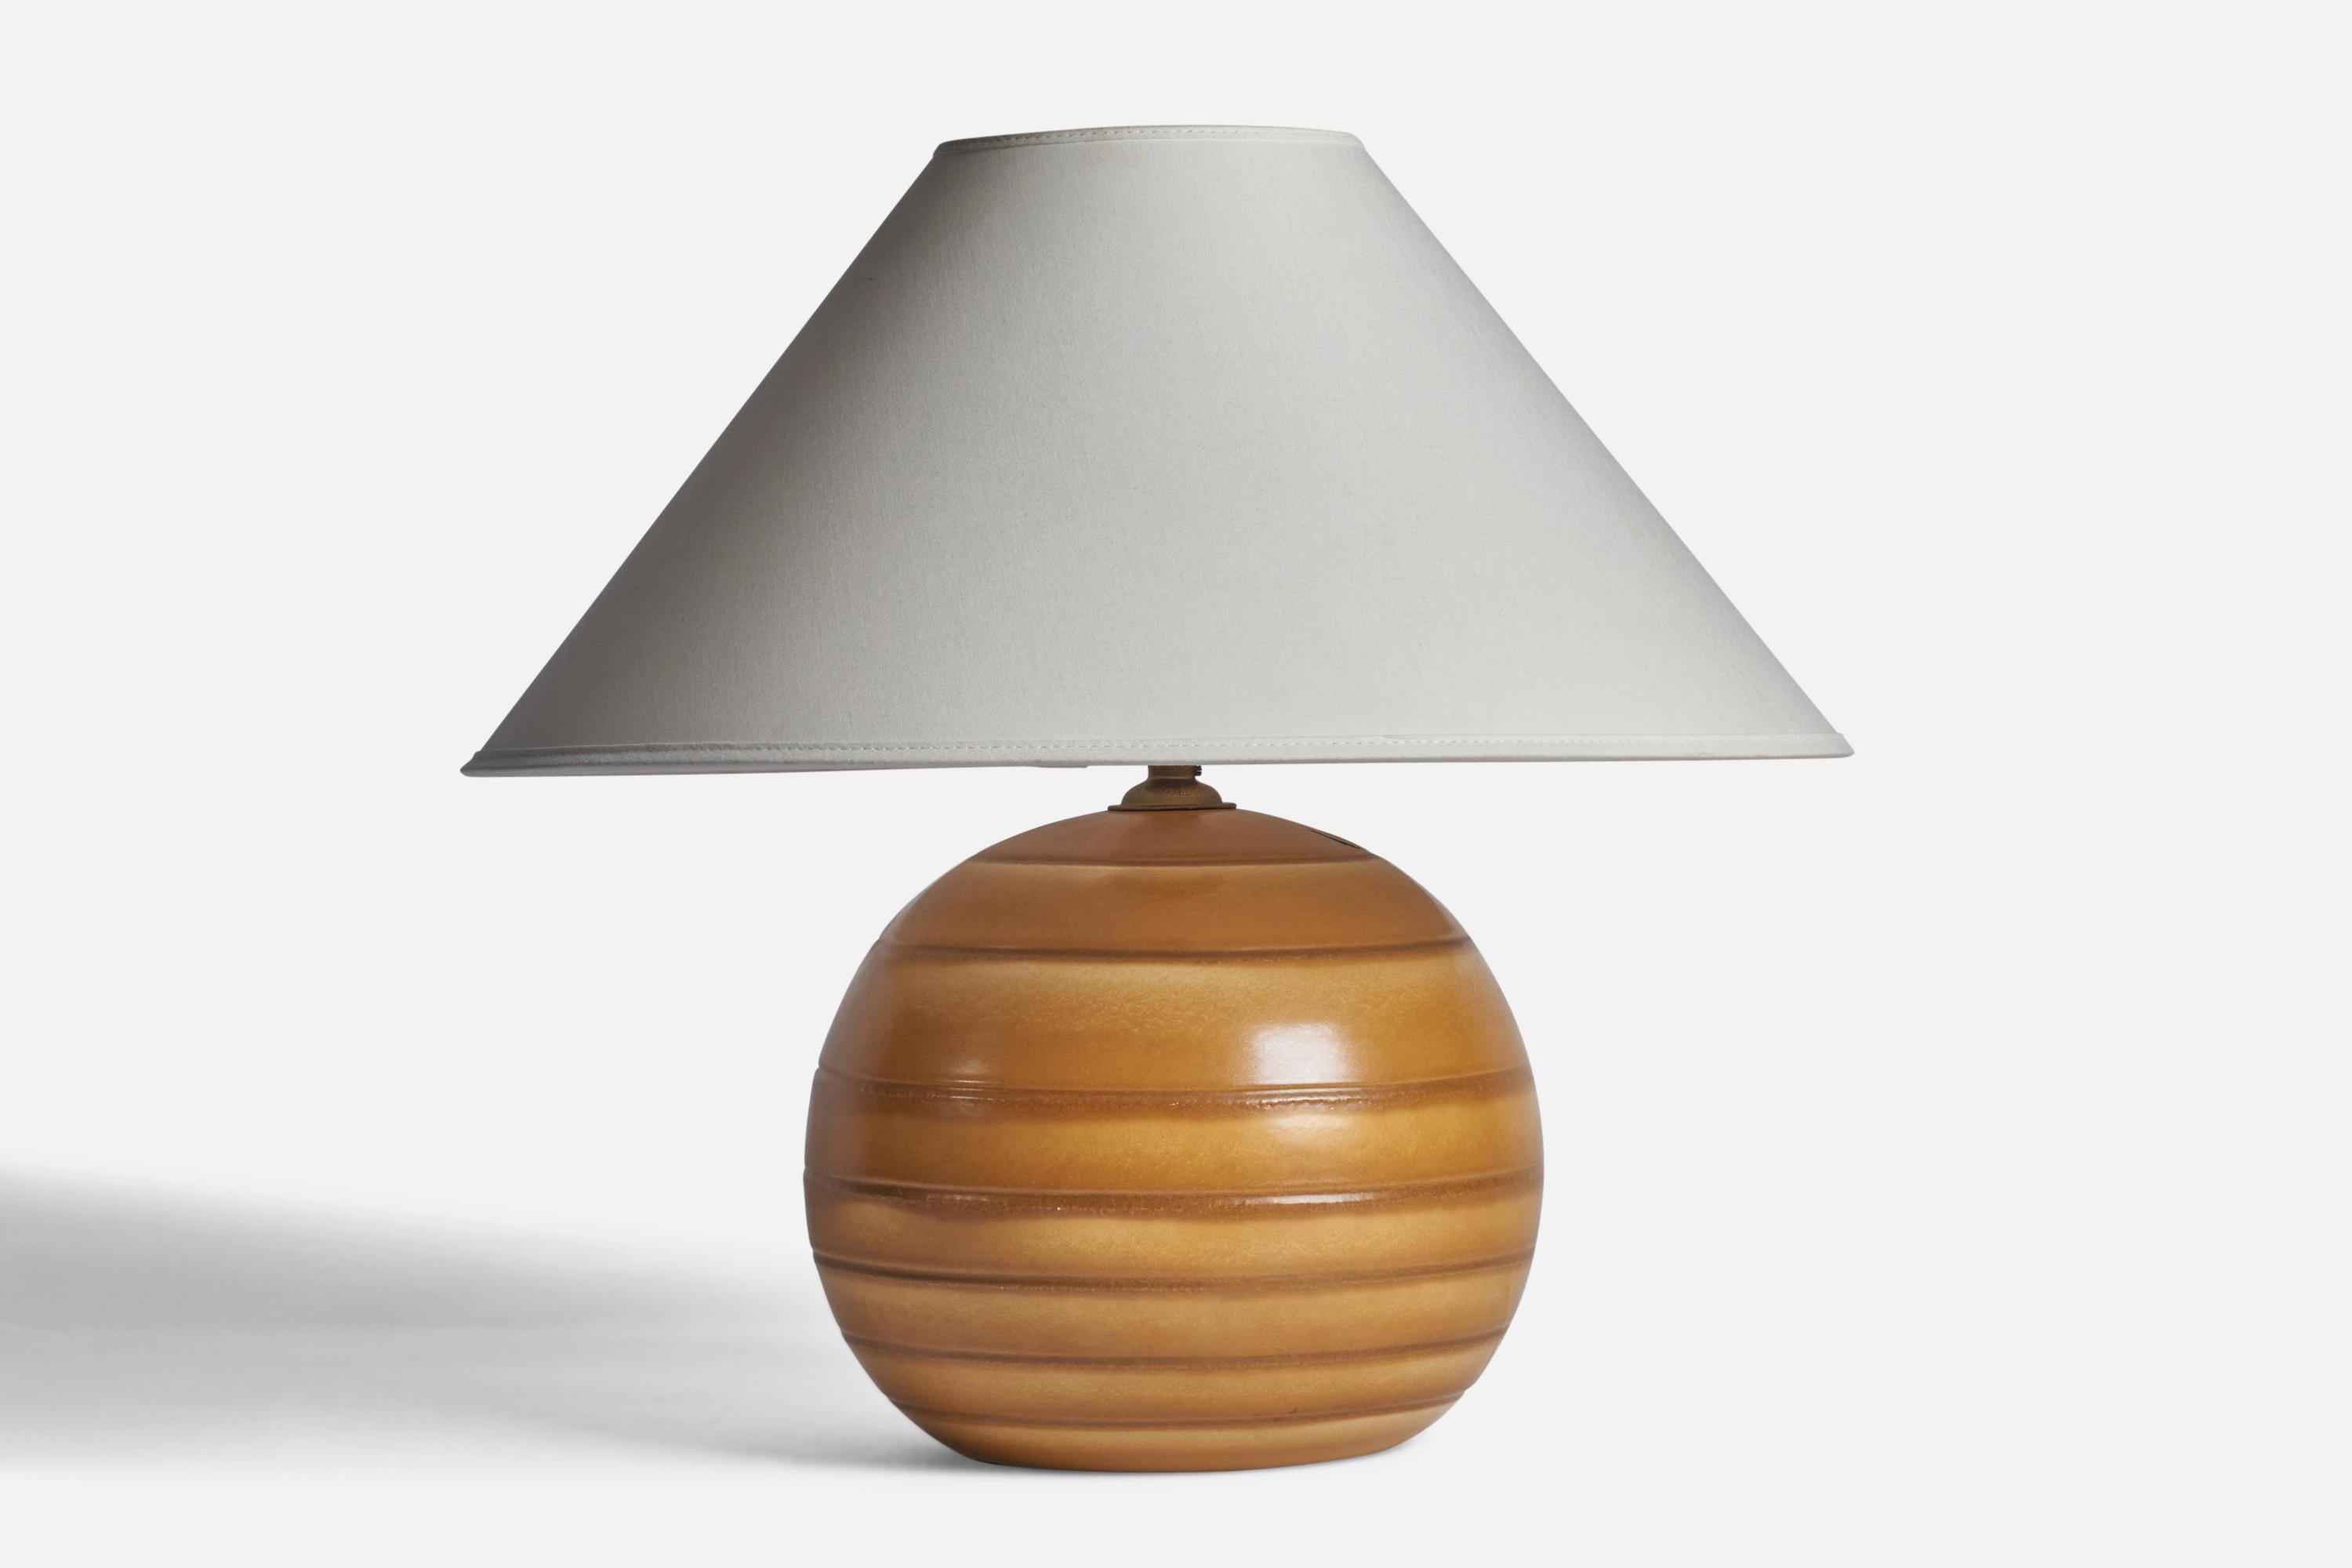 A beige-glazed and incised earthenware table lamp designed and produced by Bo Fajans, Sweden, 1940s.
”MADE IN SWEDEN 4487/6” stamp on bottom 

Dimensions of Lamp (inches): 10.5” H x 9” Diameter
Dimensions of Shade (inches): 4.5” Top Diameter x 16”